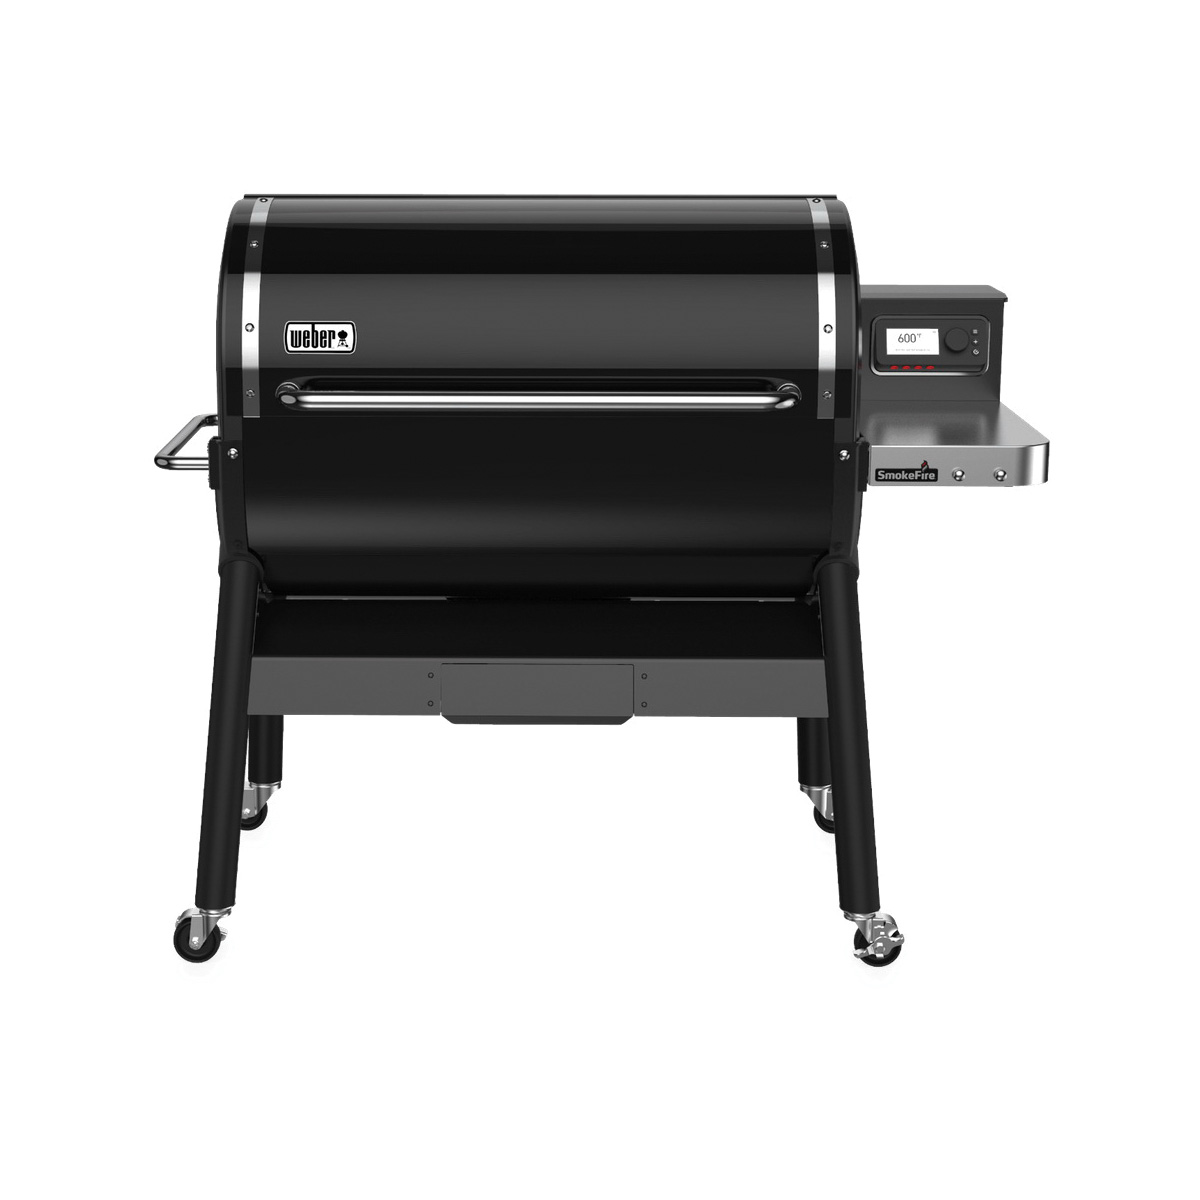 SmokeFire 23510001 Pellet Grill, 1008 sq-in Primary Cooking Surface, Side Shelf Included: Yes, Steel Body, Black